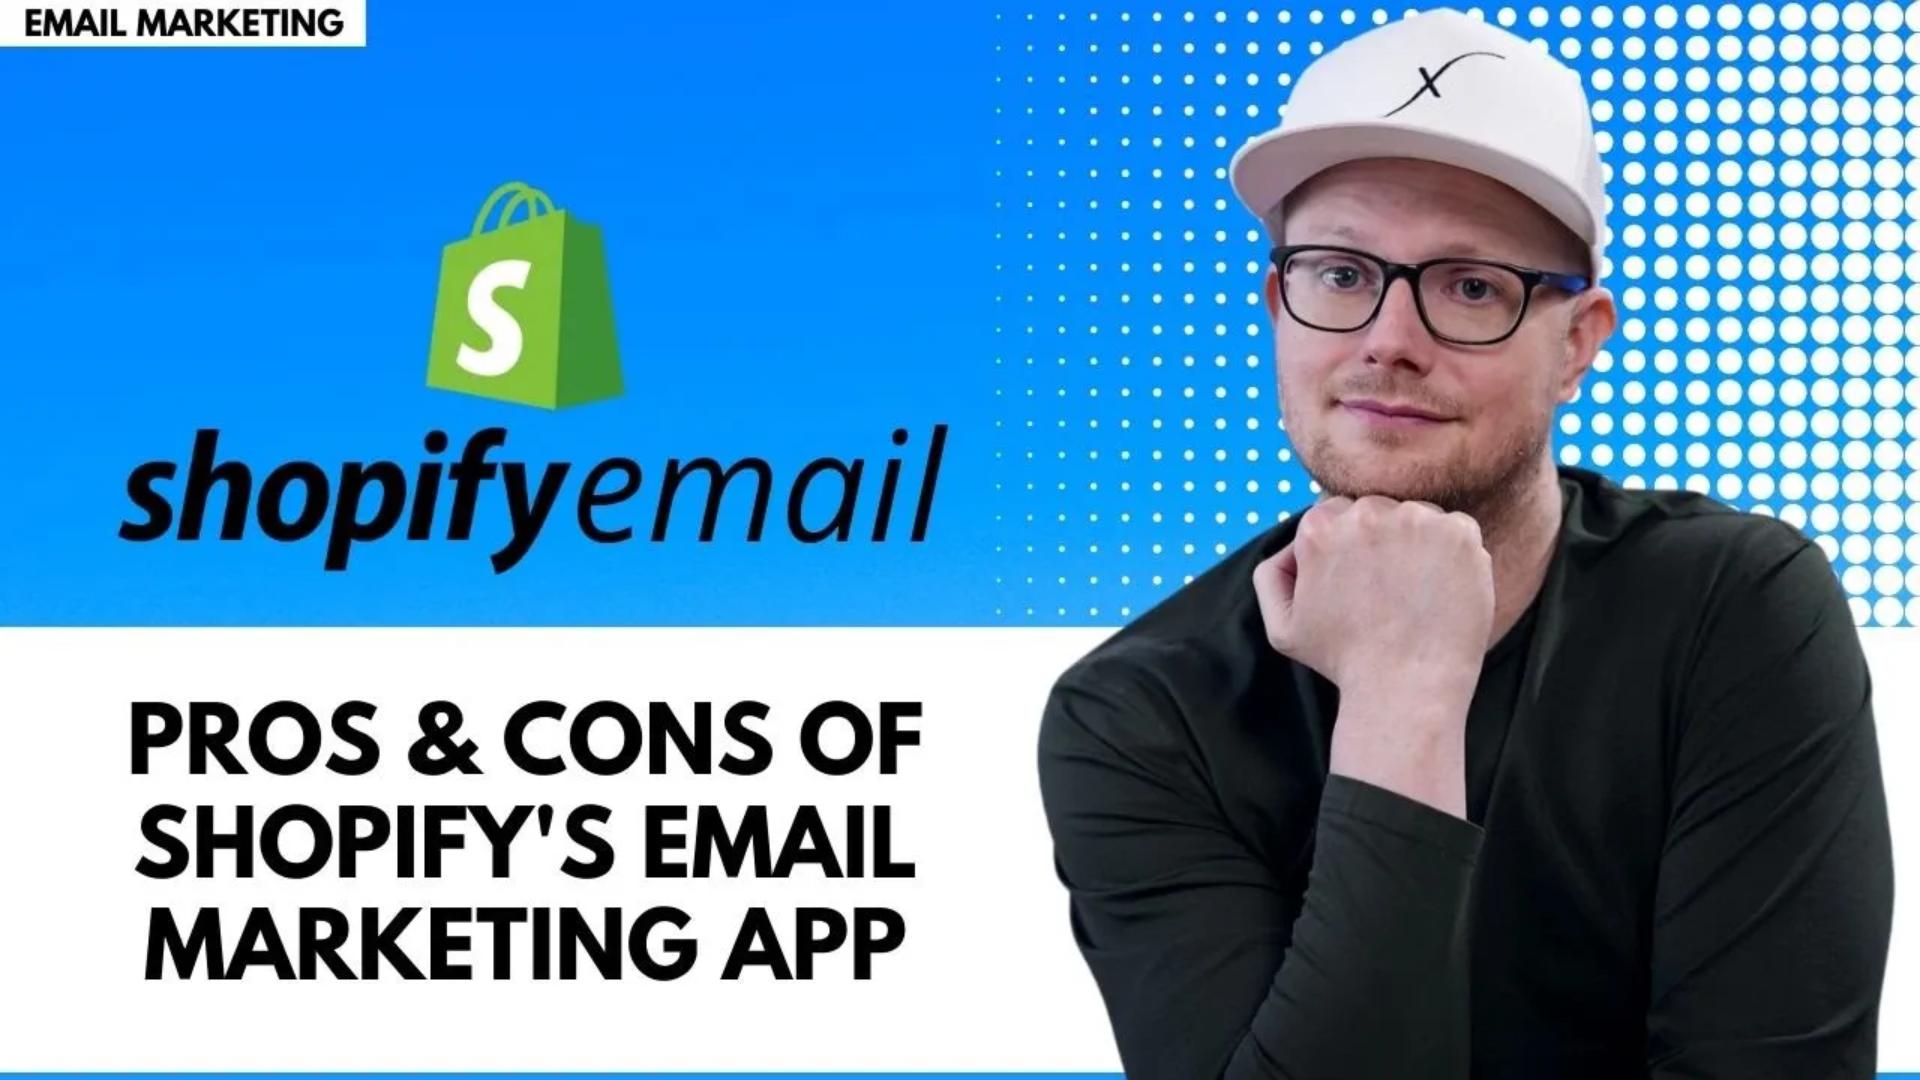 Pros & Cons of Shopify's Email Marketing App